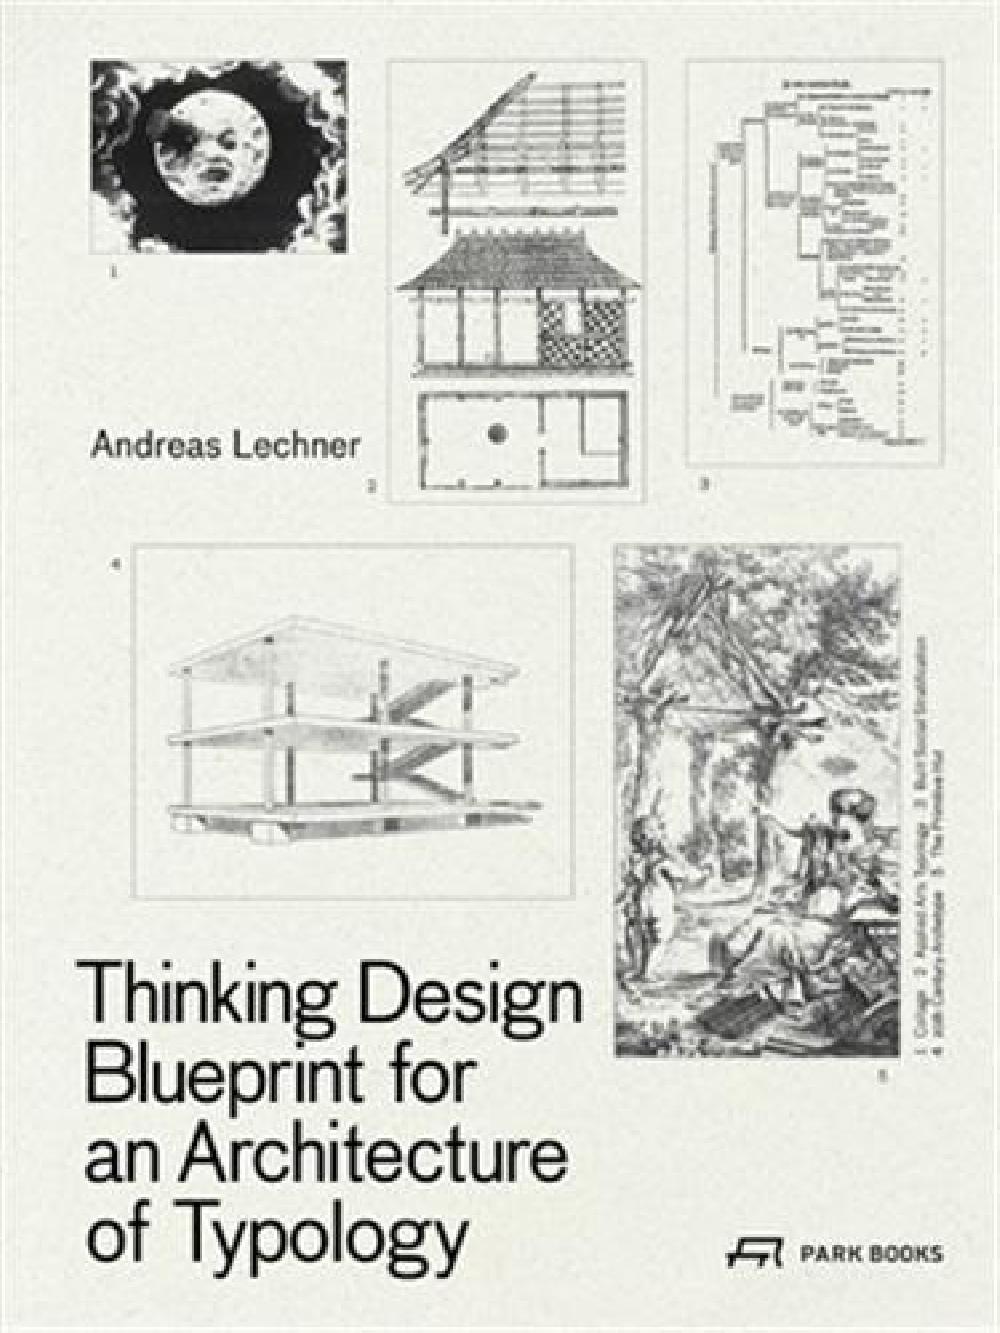 Thinking design - Blueprint for an architecture of typology